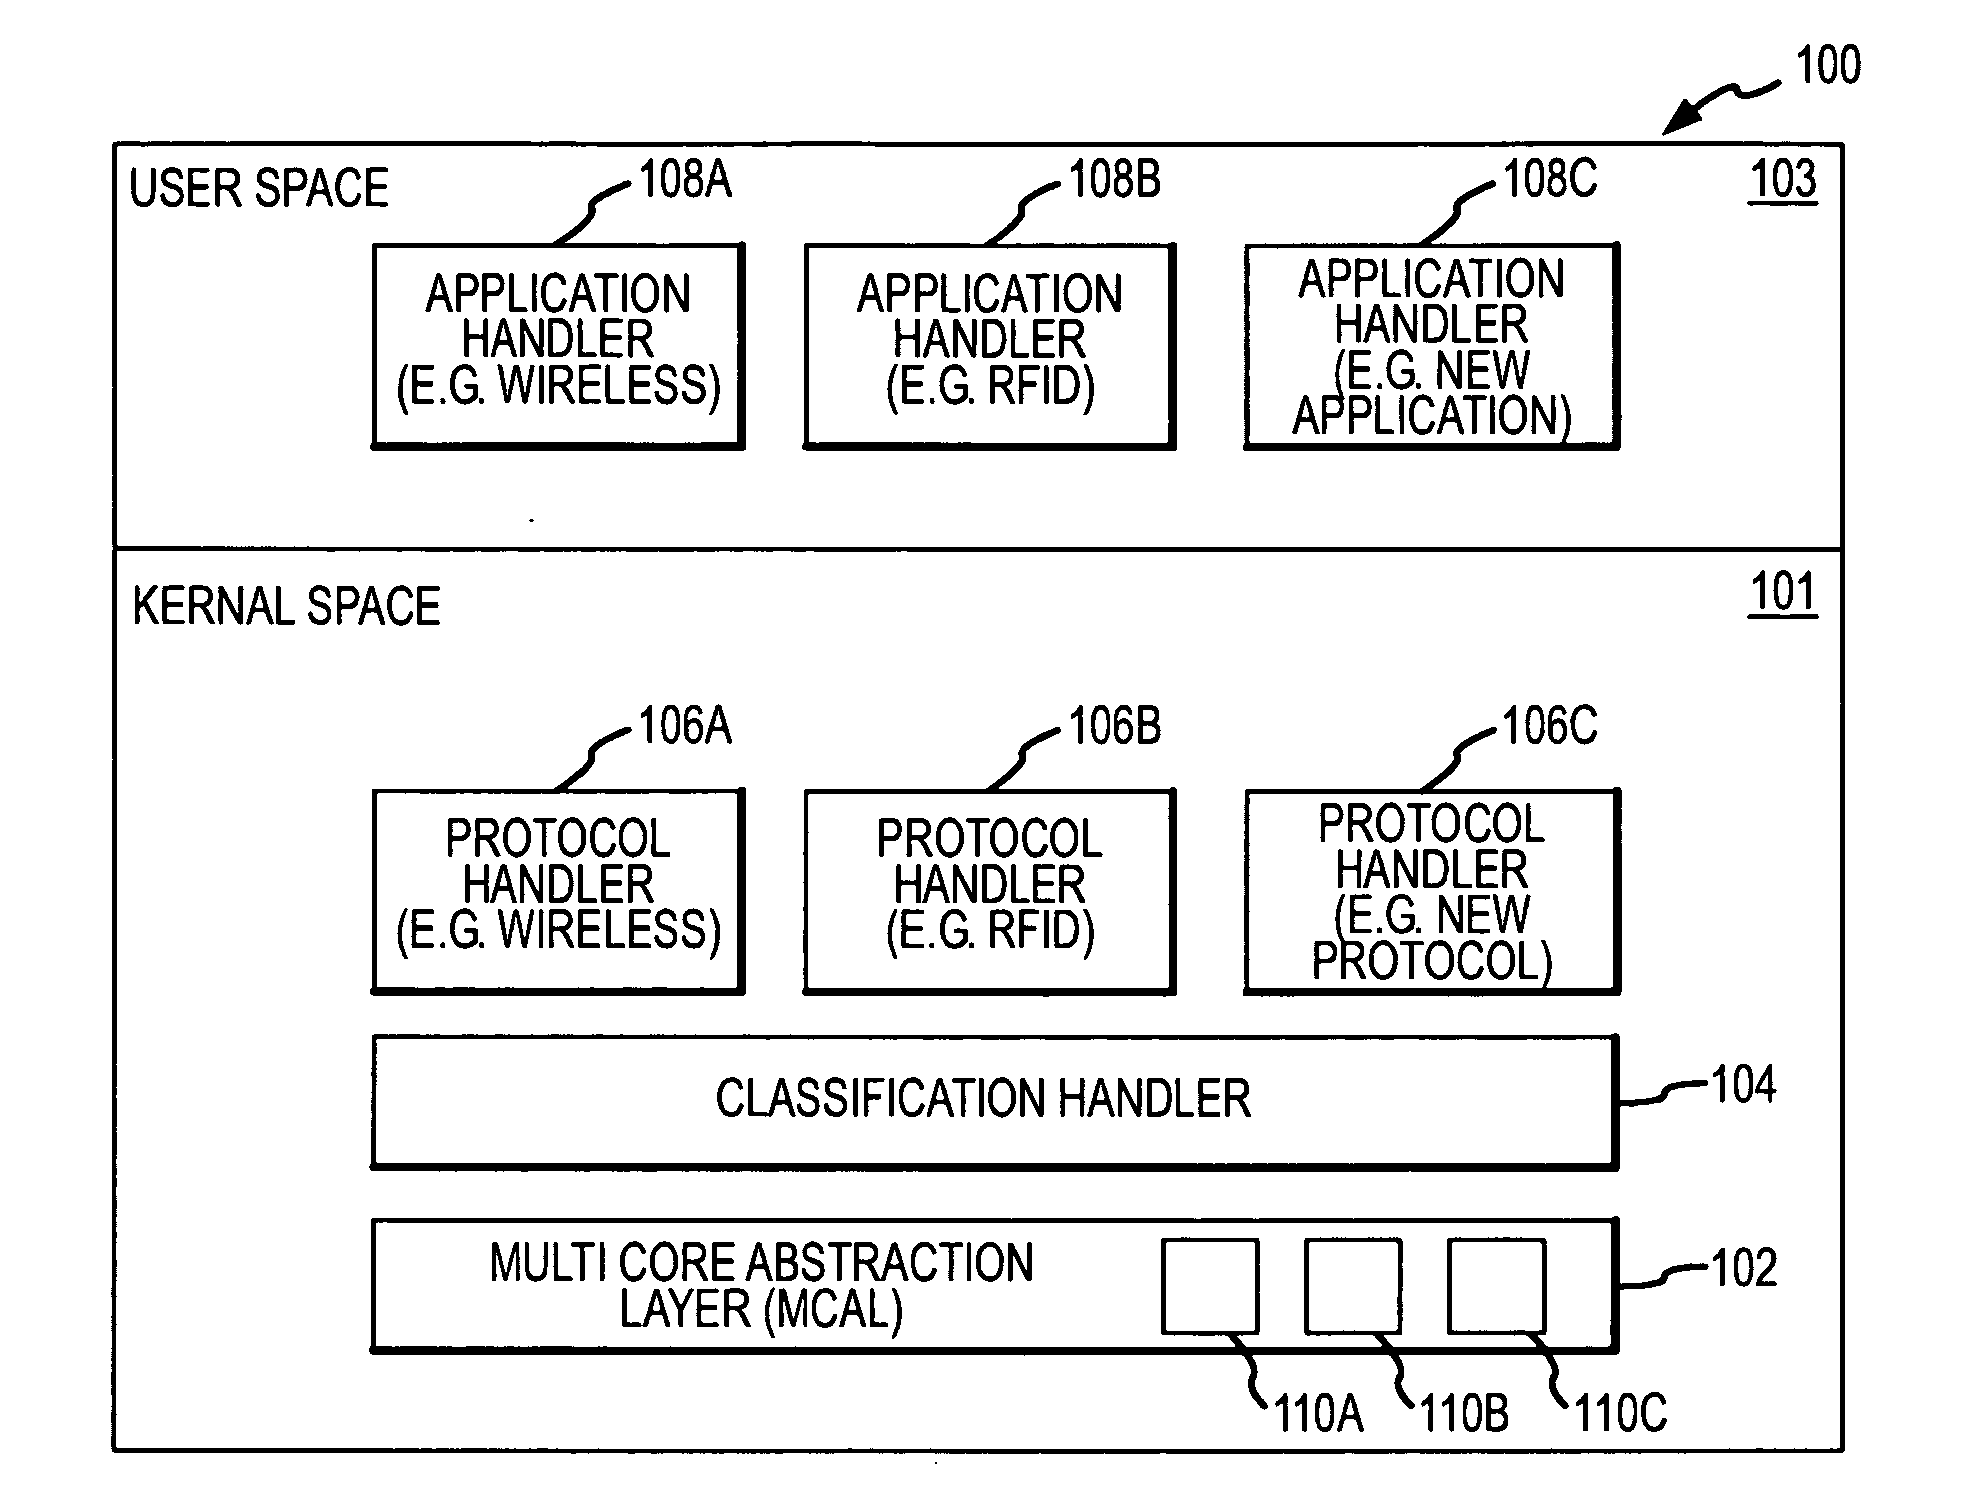 Systems and methods for processing data packets using a multi-core abstraction layer (MCAL)